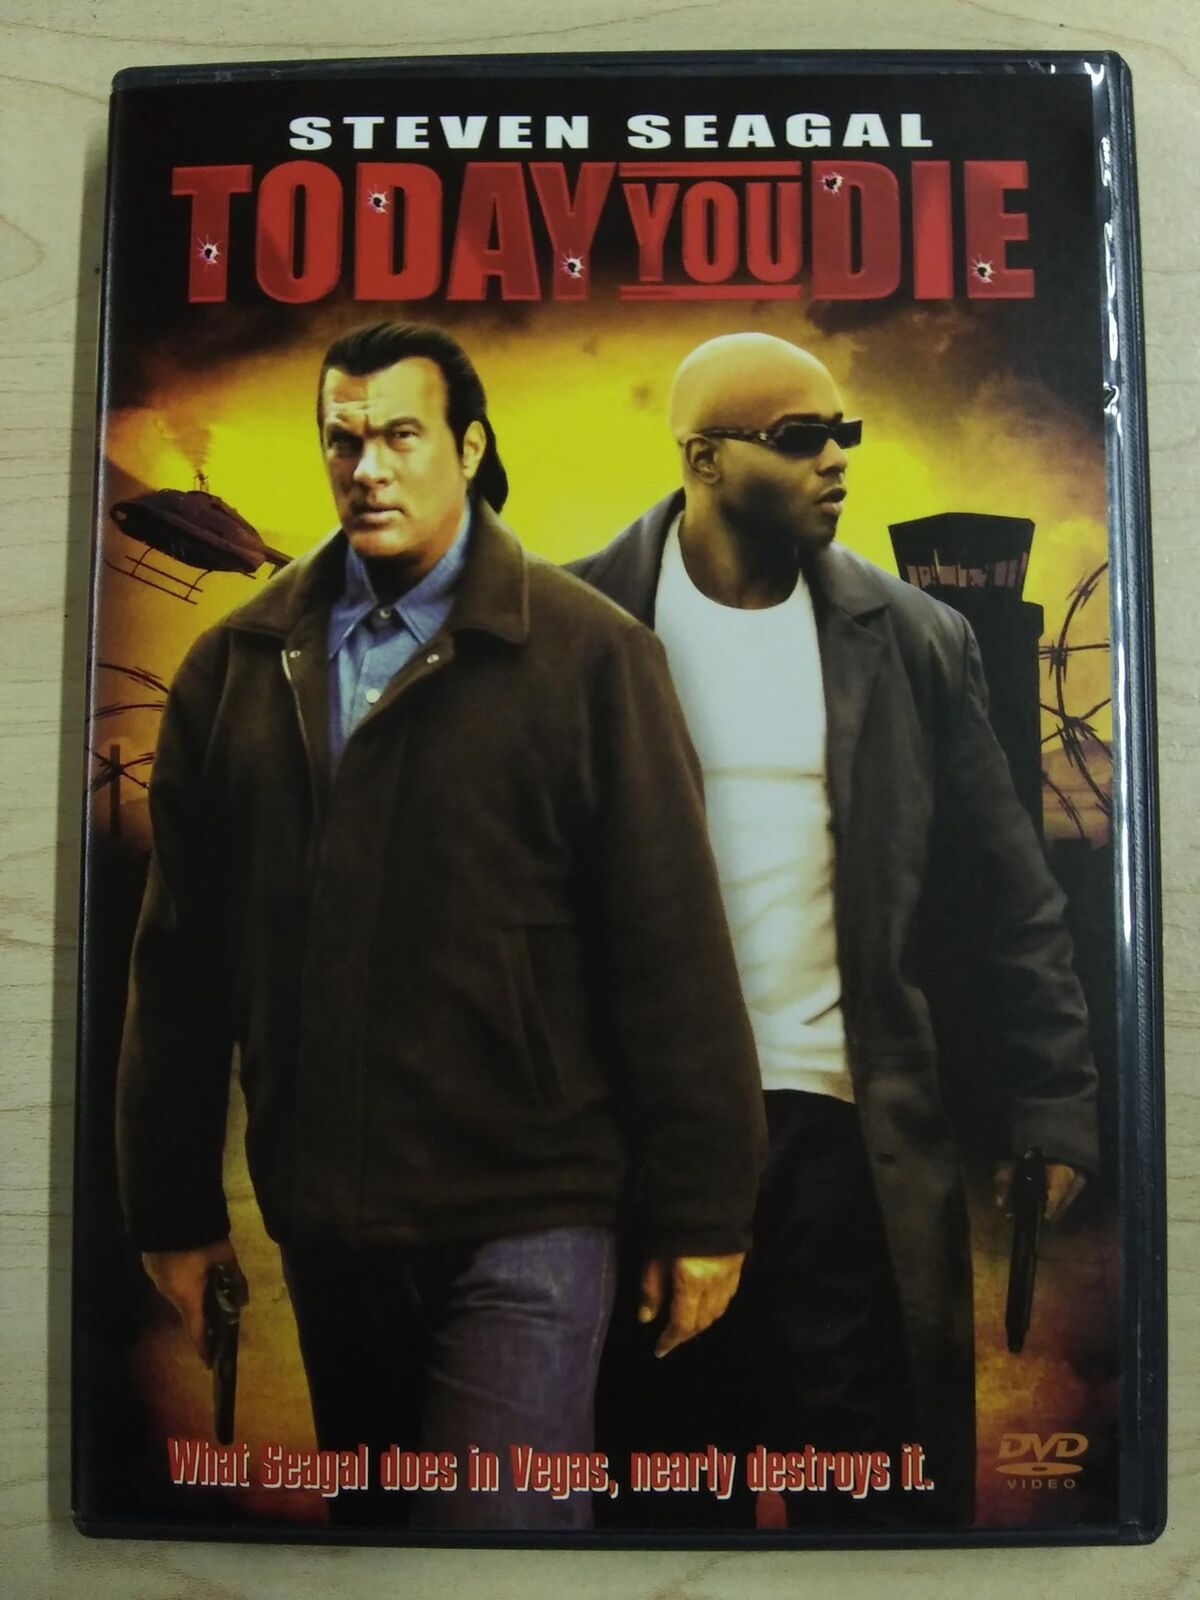 Today You Die (DVD, 2005) - J1231